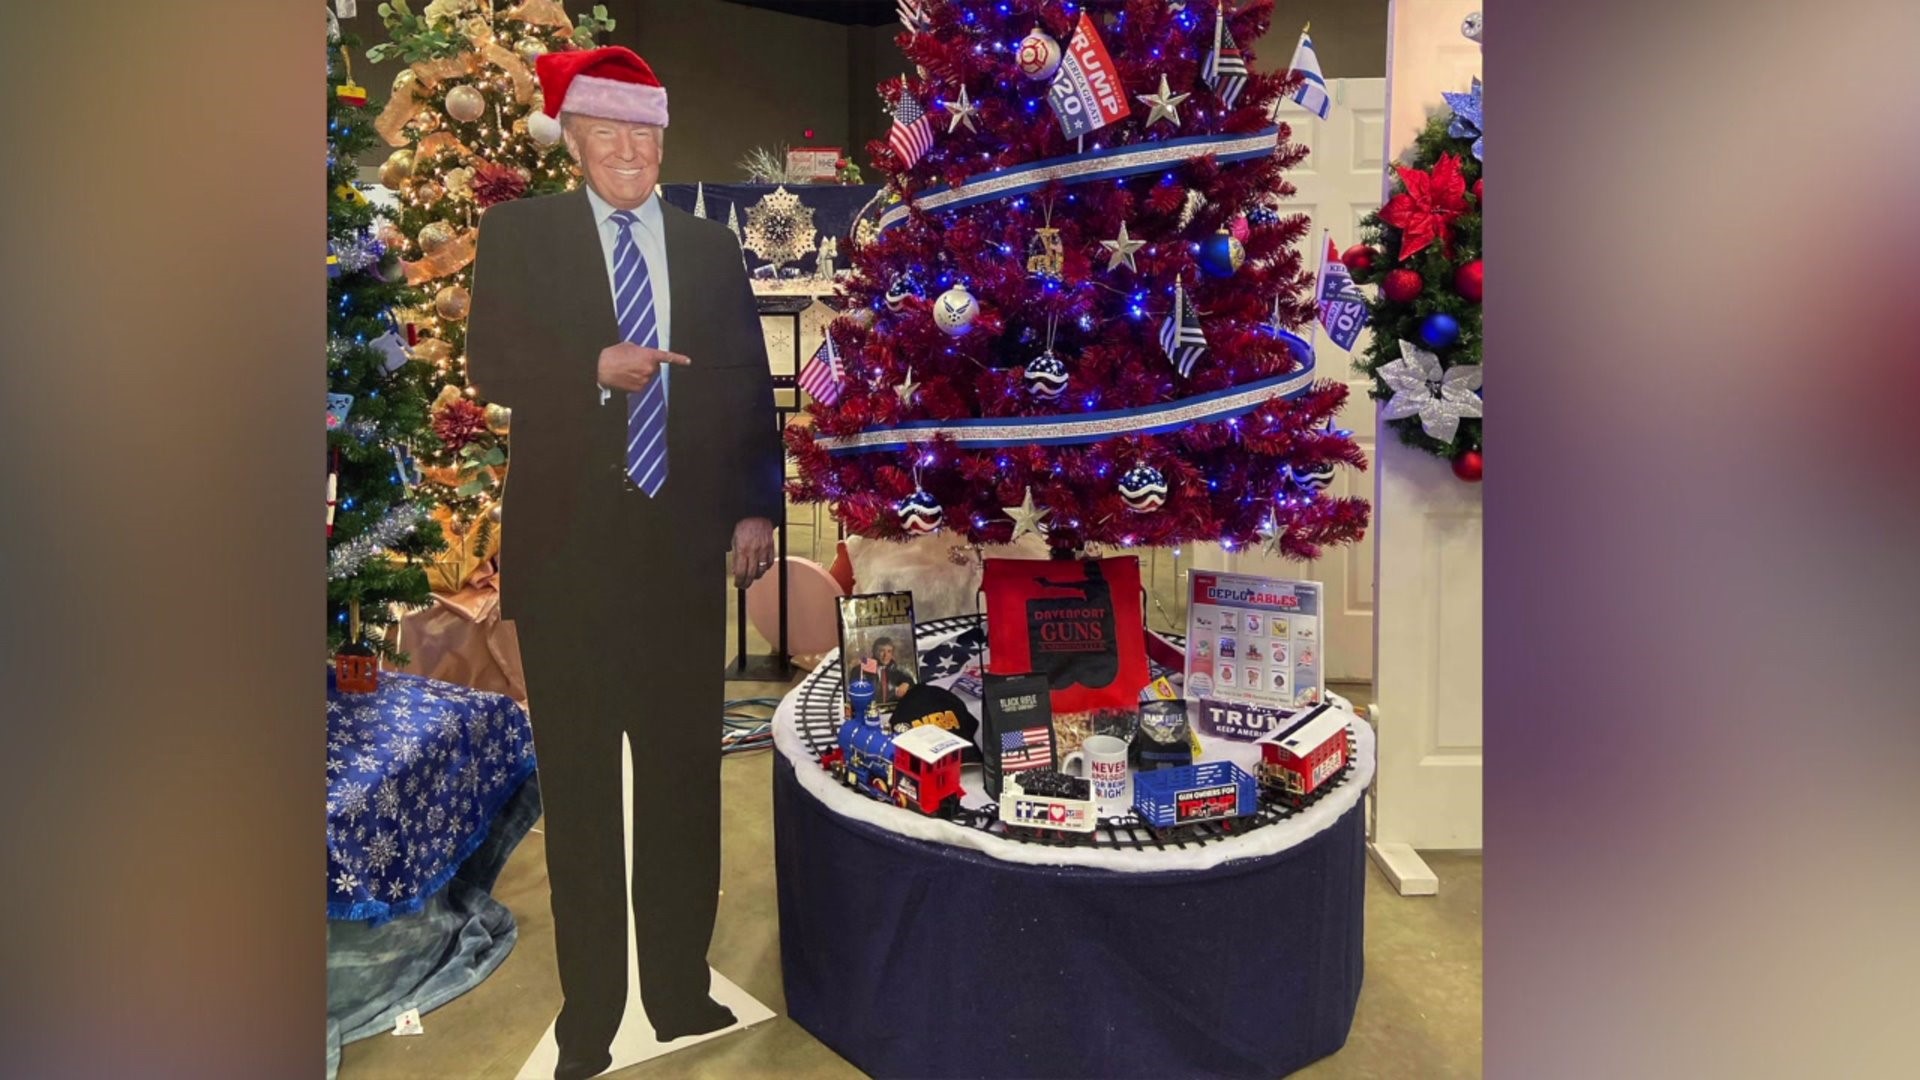 Festival of Trees leaders respond after "Trump Tree" is pulled